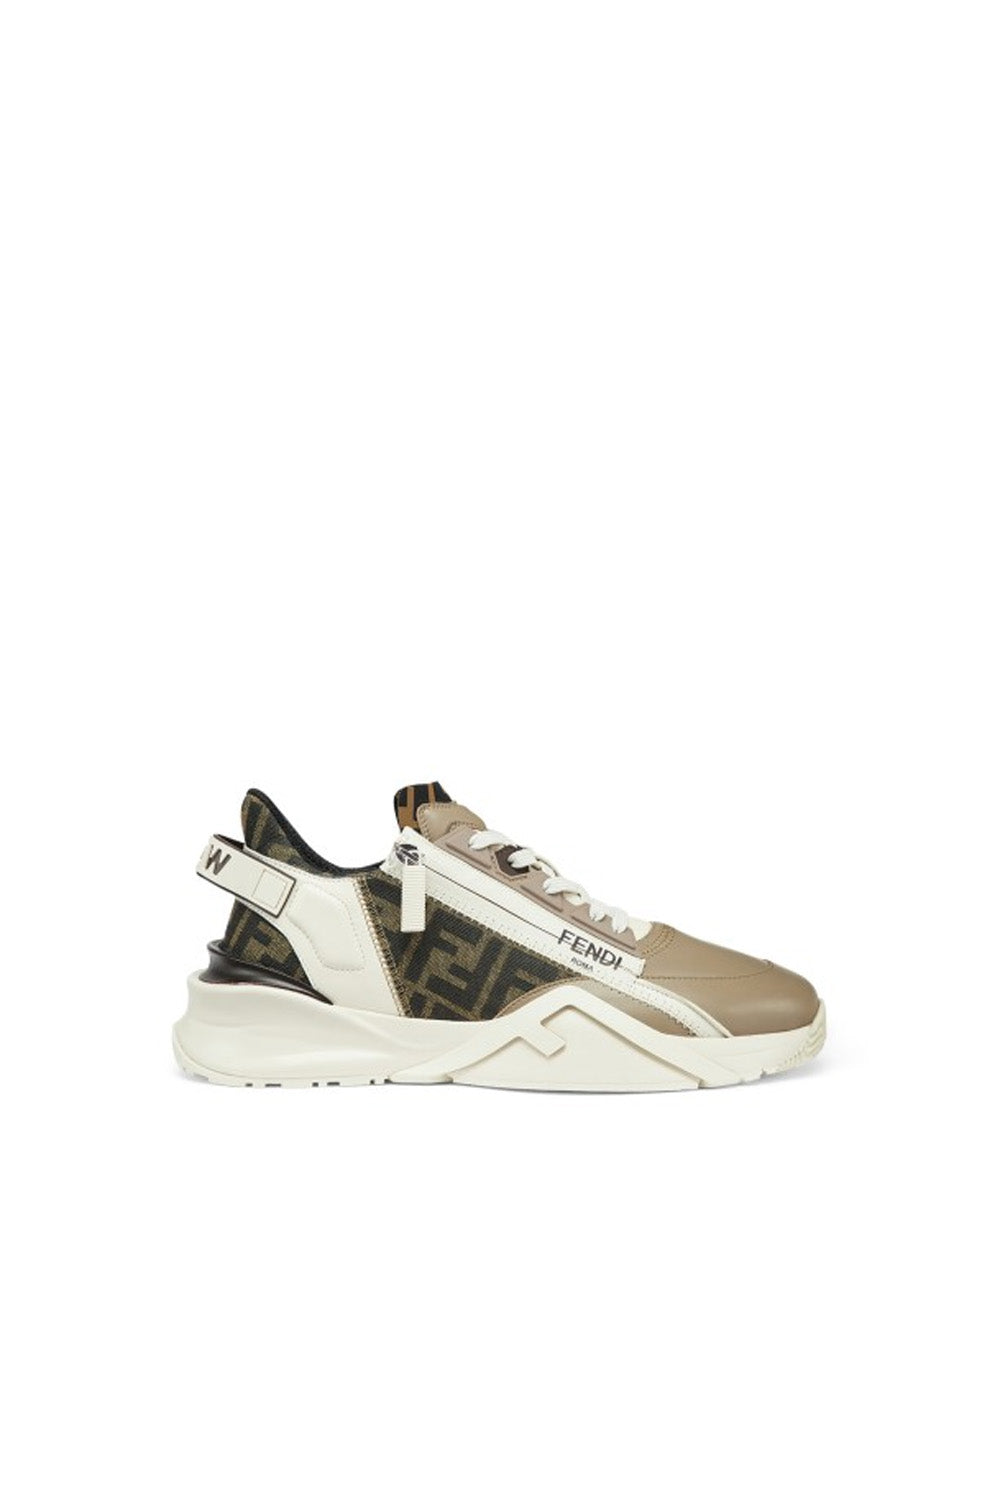 Fendi Flow leather and jacquard fabric sneakers